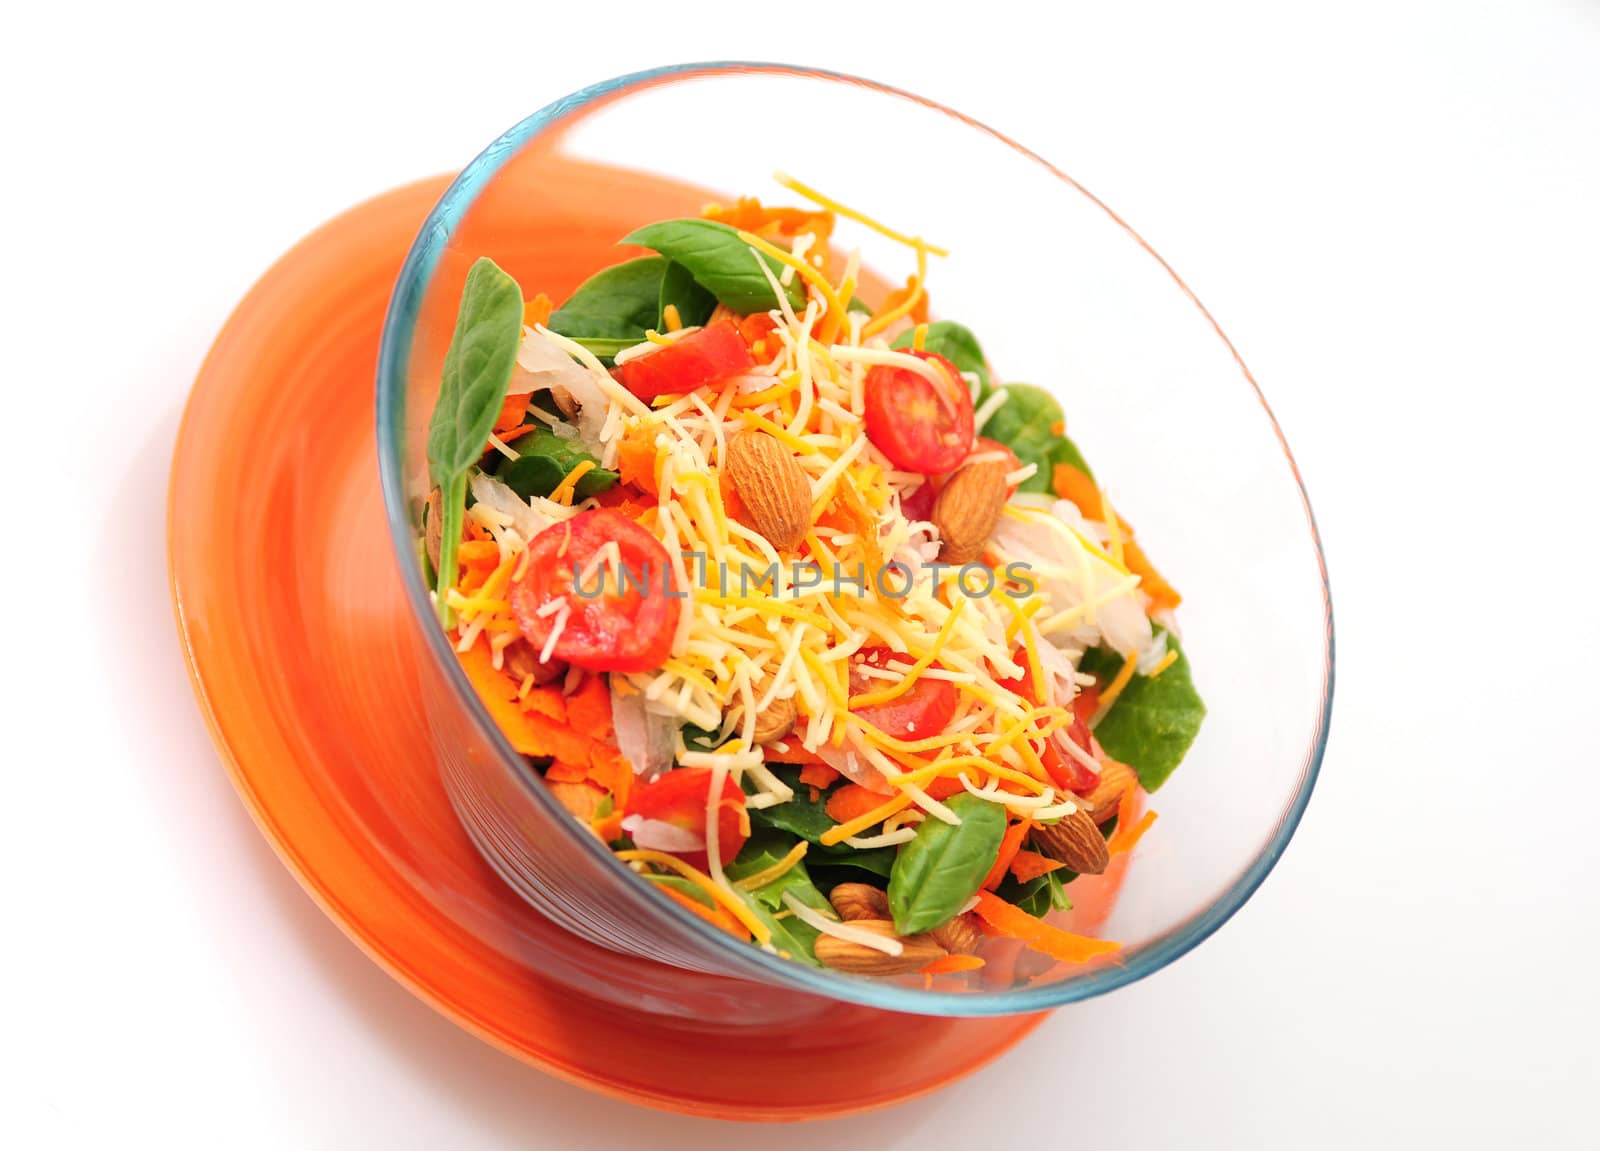 Healthy bowl of salad with greens, veggies and cheese isolated on white